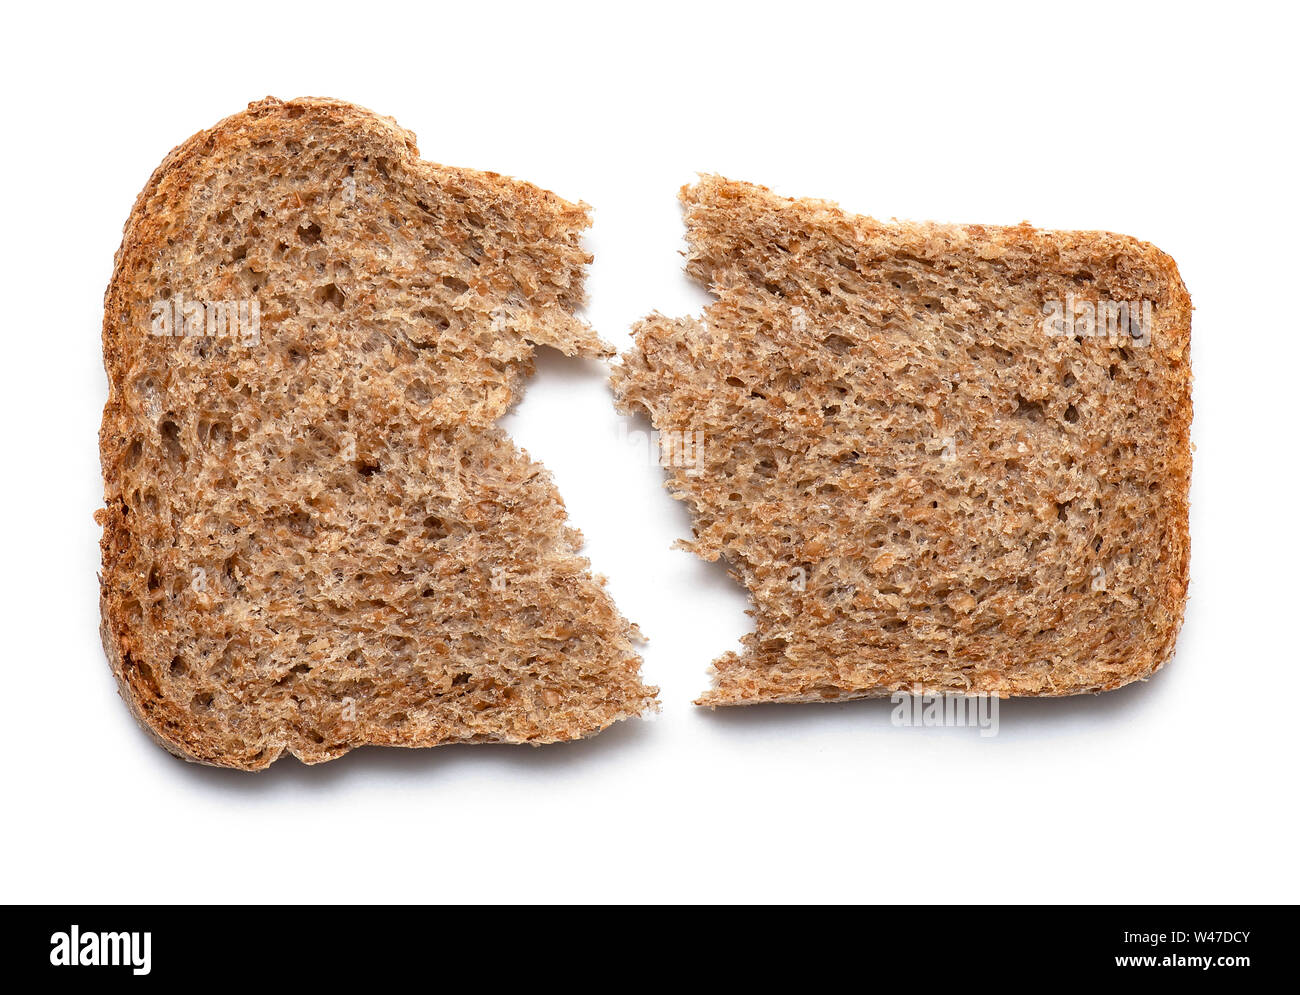 Top view of crumbled multi Grain brown Bread isolated on white Background Stock Photo